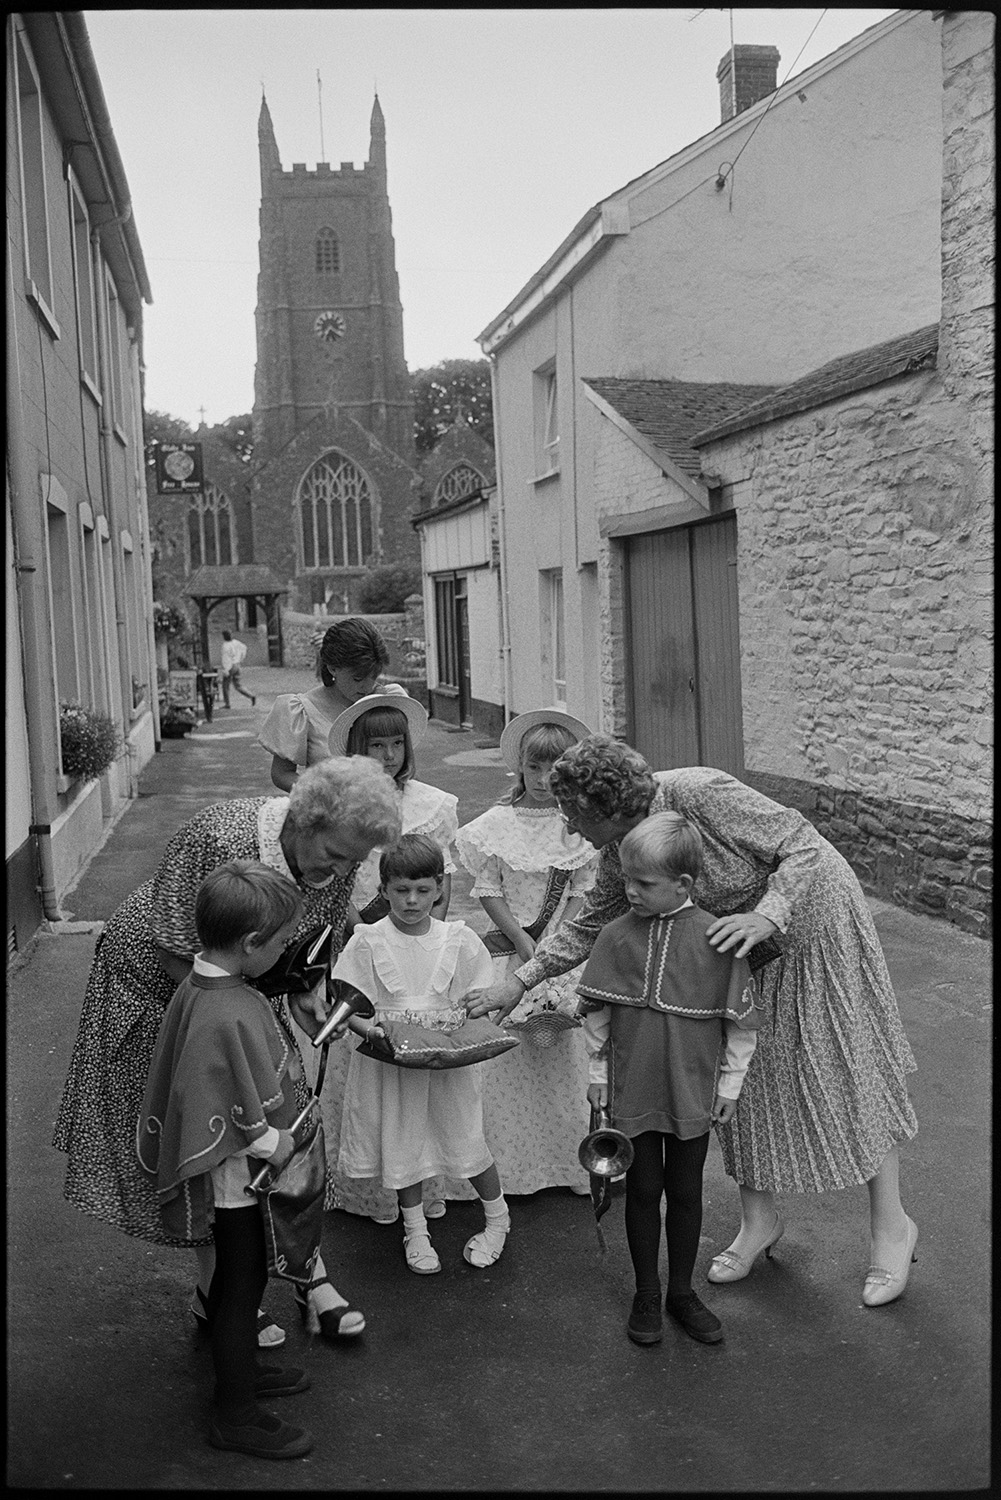 Chulmleigh Fair, Queen and attendants leaving church and processing through village.
[Two women helping a group of young children who are acting as attendants to the Chulmleigh Fair Queen who is standing behind them, in New Street, Chulmleigh. The Church of St Mary Magdalene is visible in the background. The boys are holding trumpets and the girl in the foreground is holding a crown resting on a cushion.]